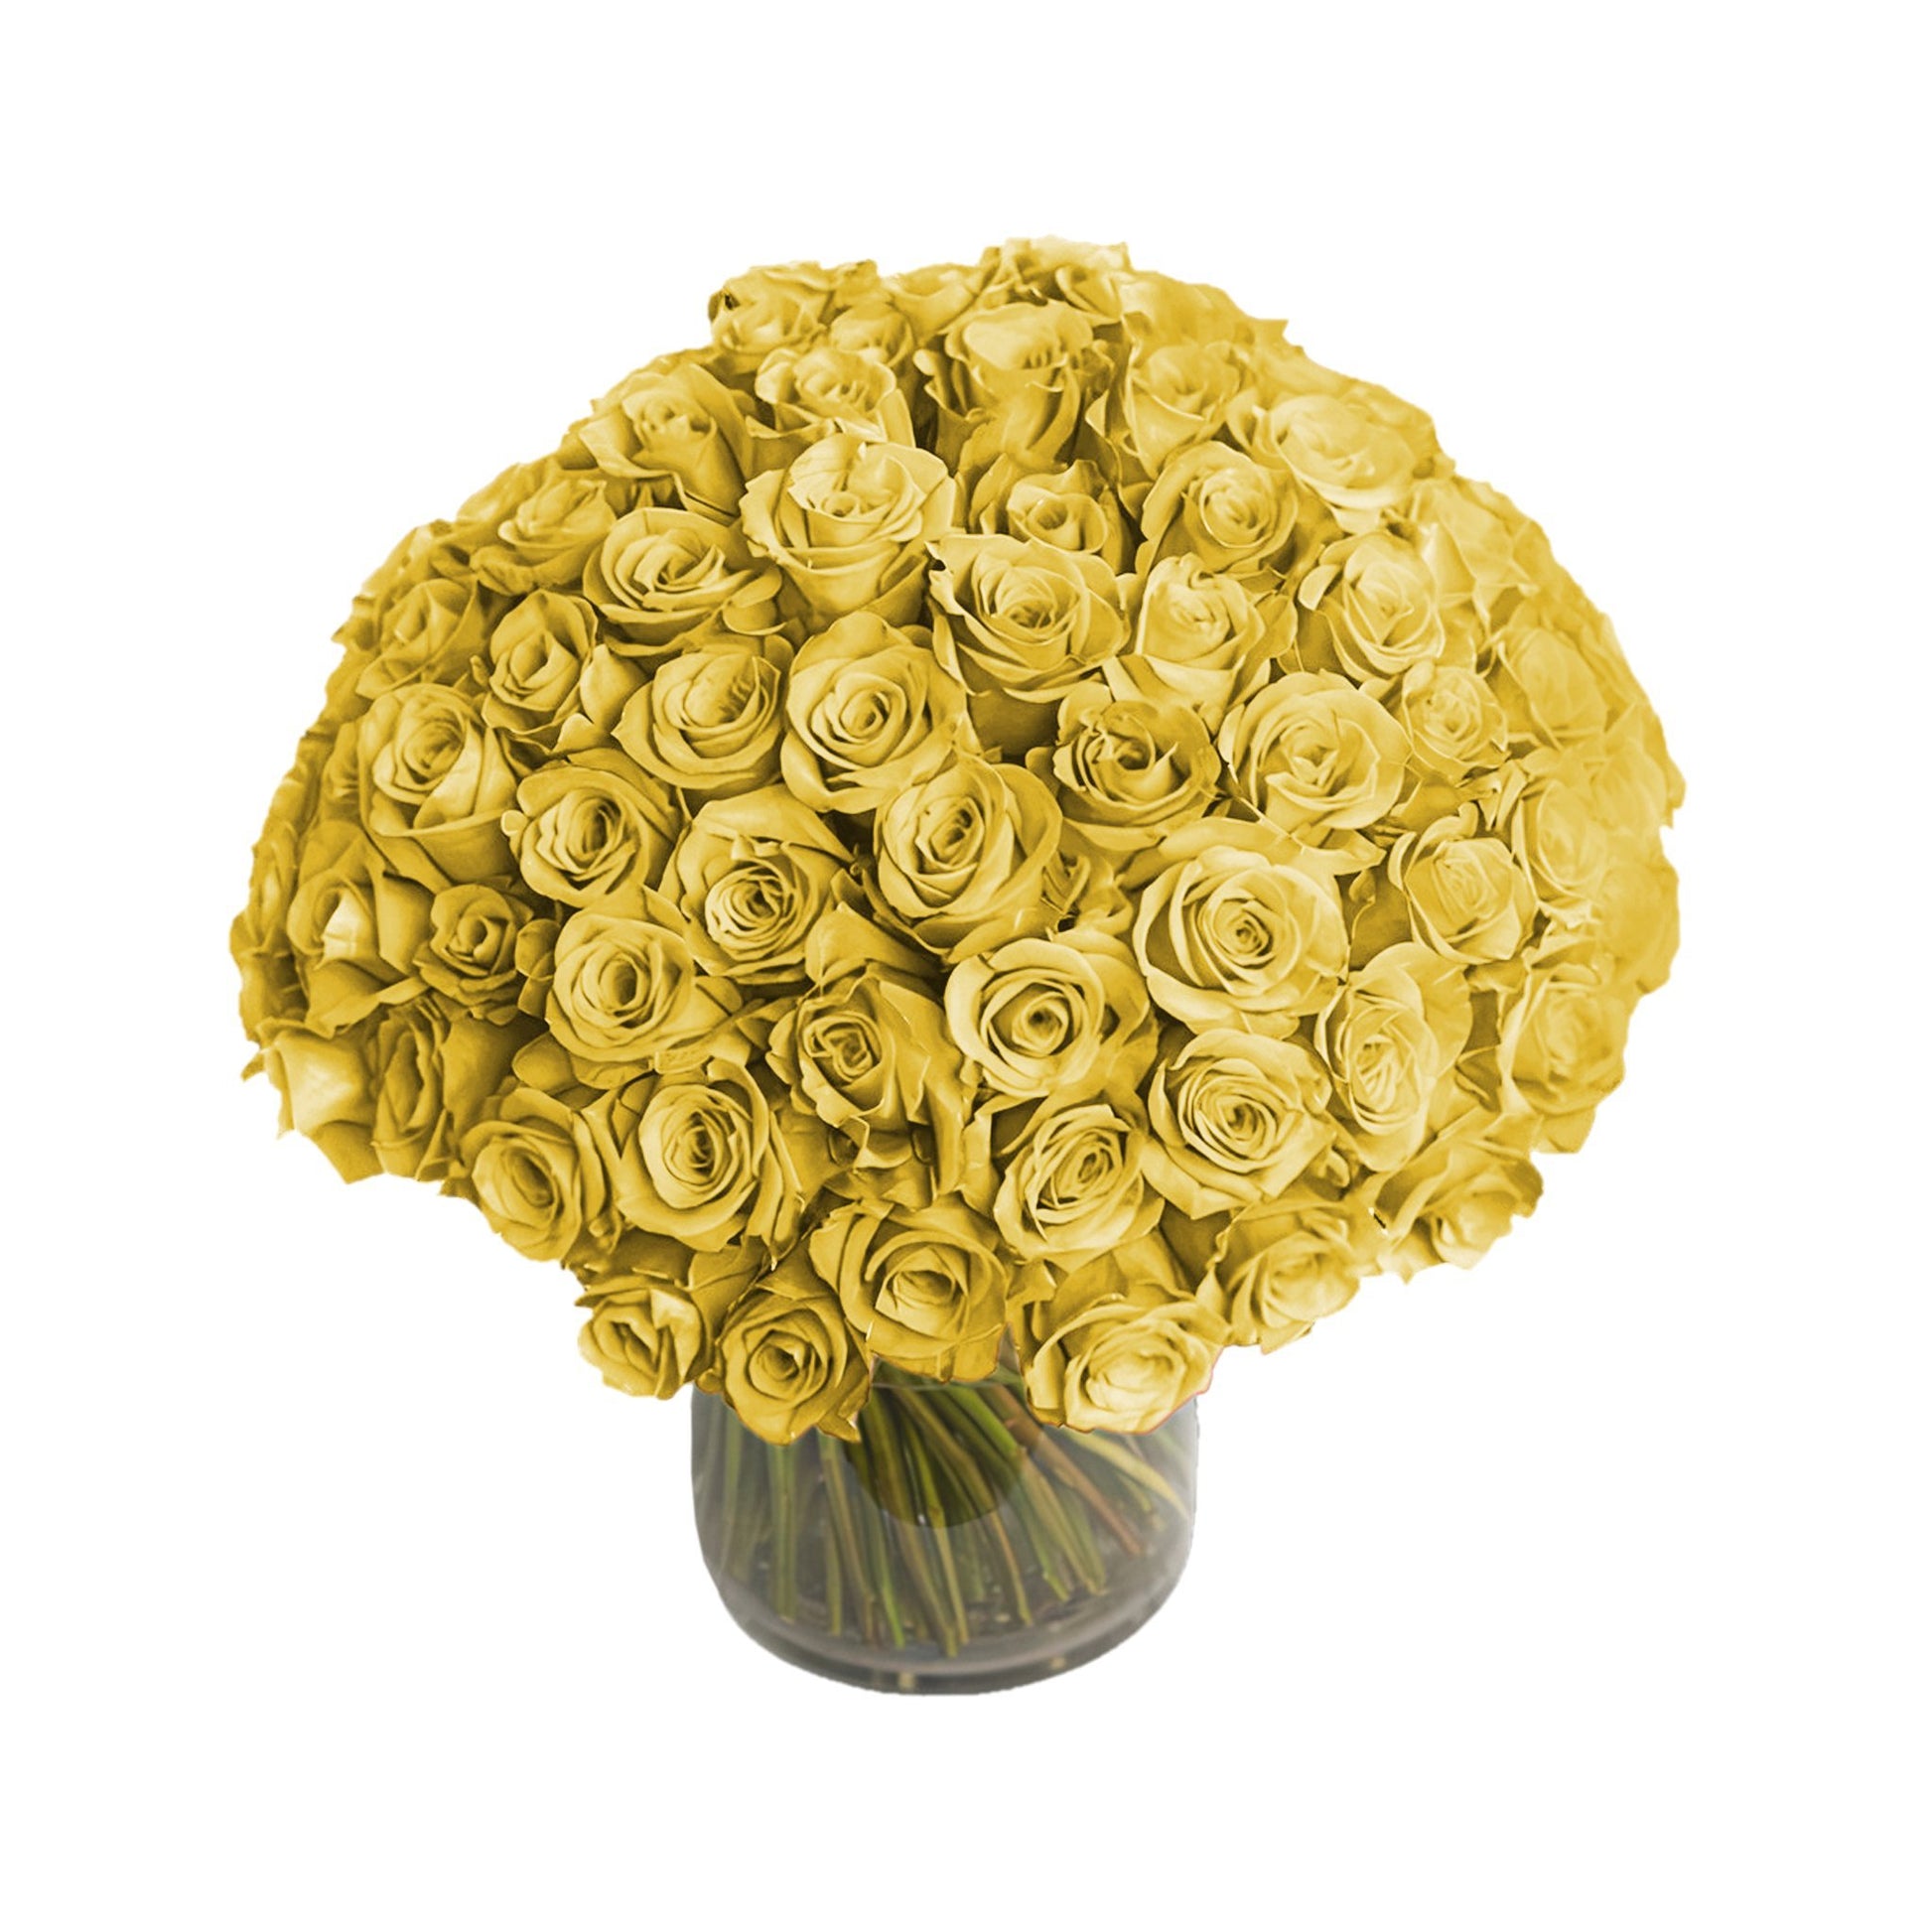 NYC Flower Delivery - Fresh Roses in a Vase | 100 Yellow Roses - Roses